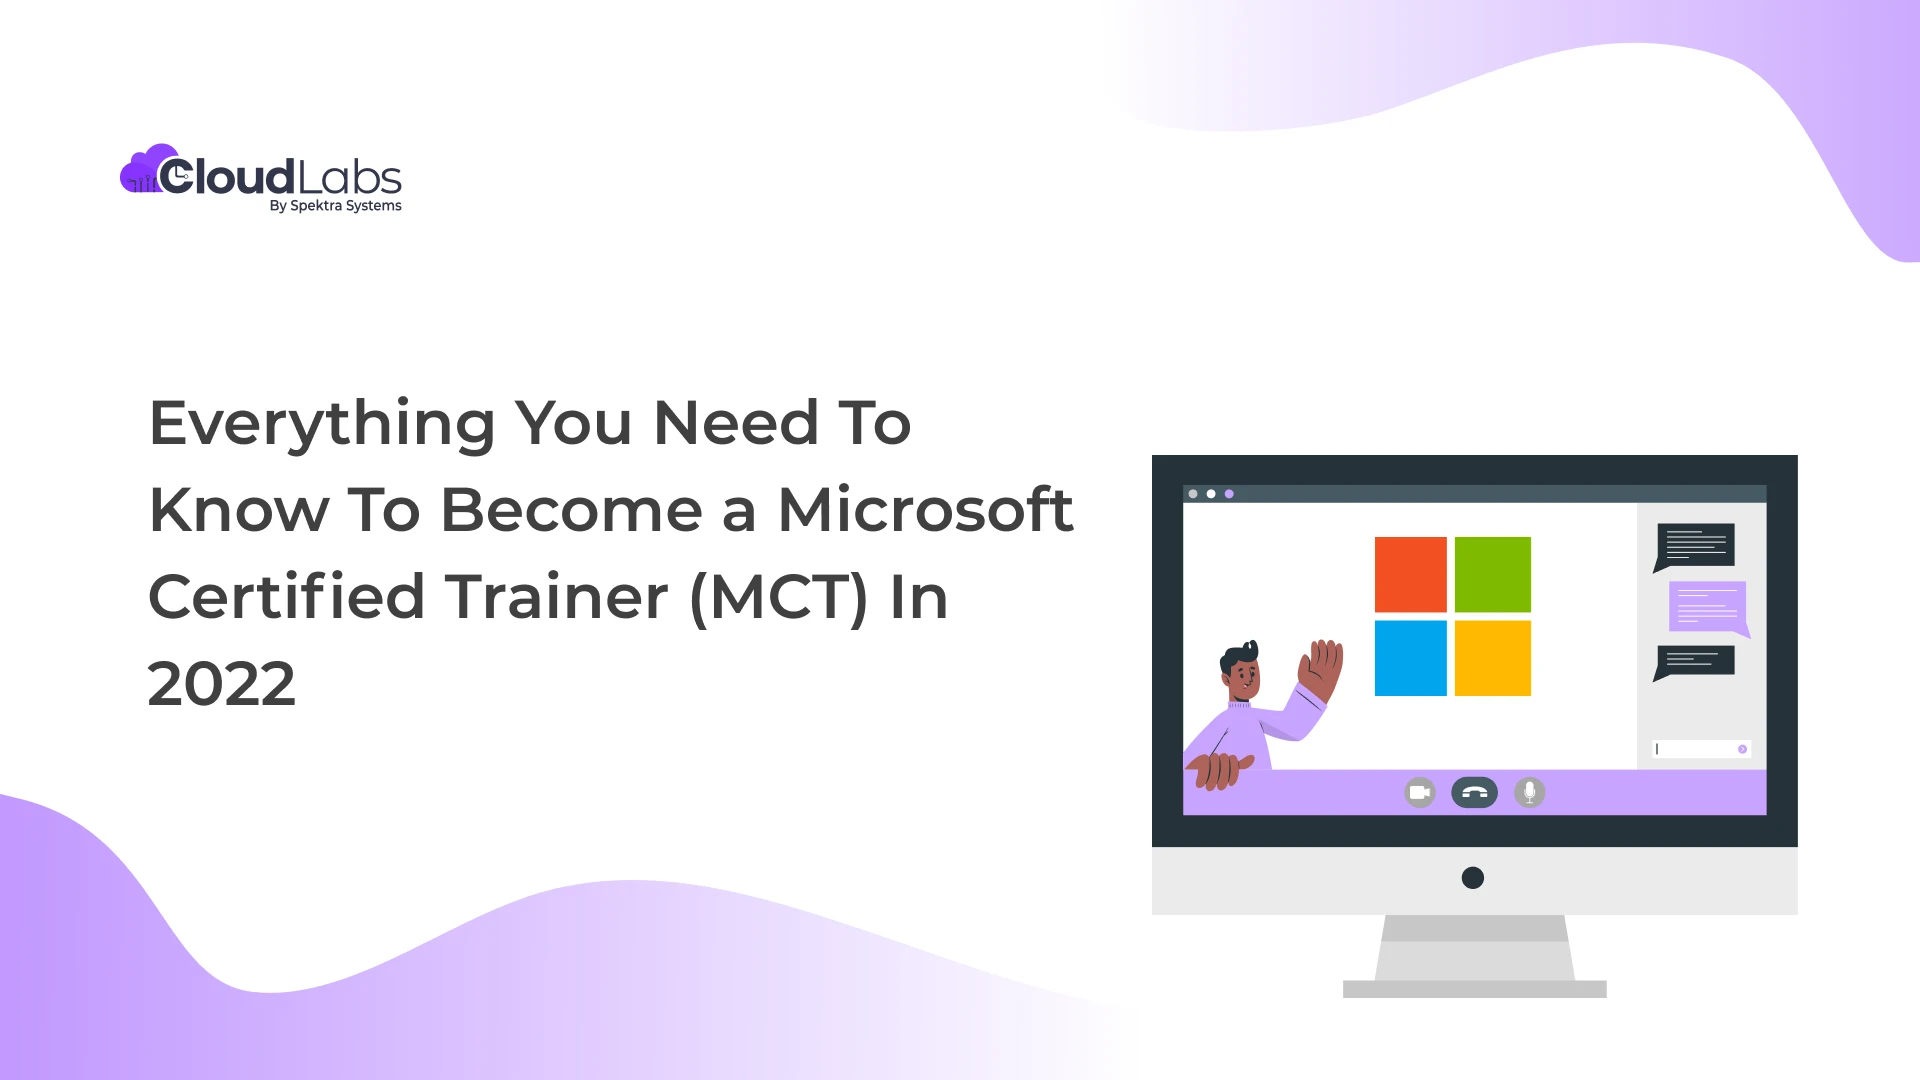 Everything You Need To Know To Become a Microsoft Certified Trainer (MCT) In 2022